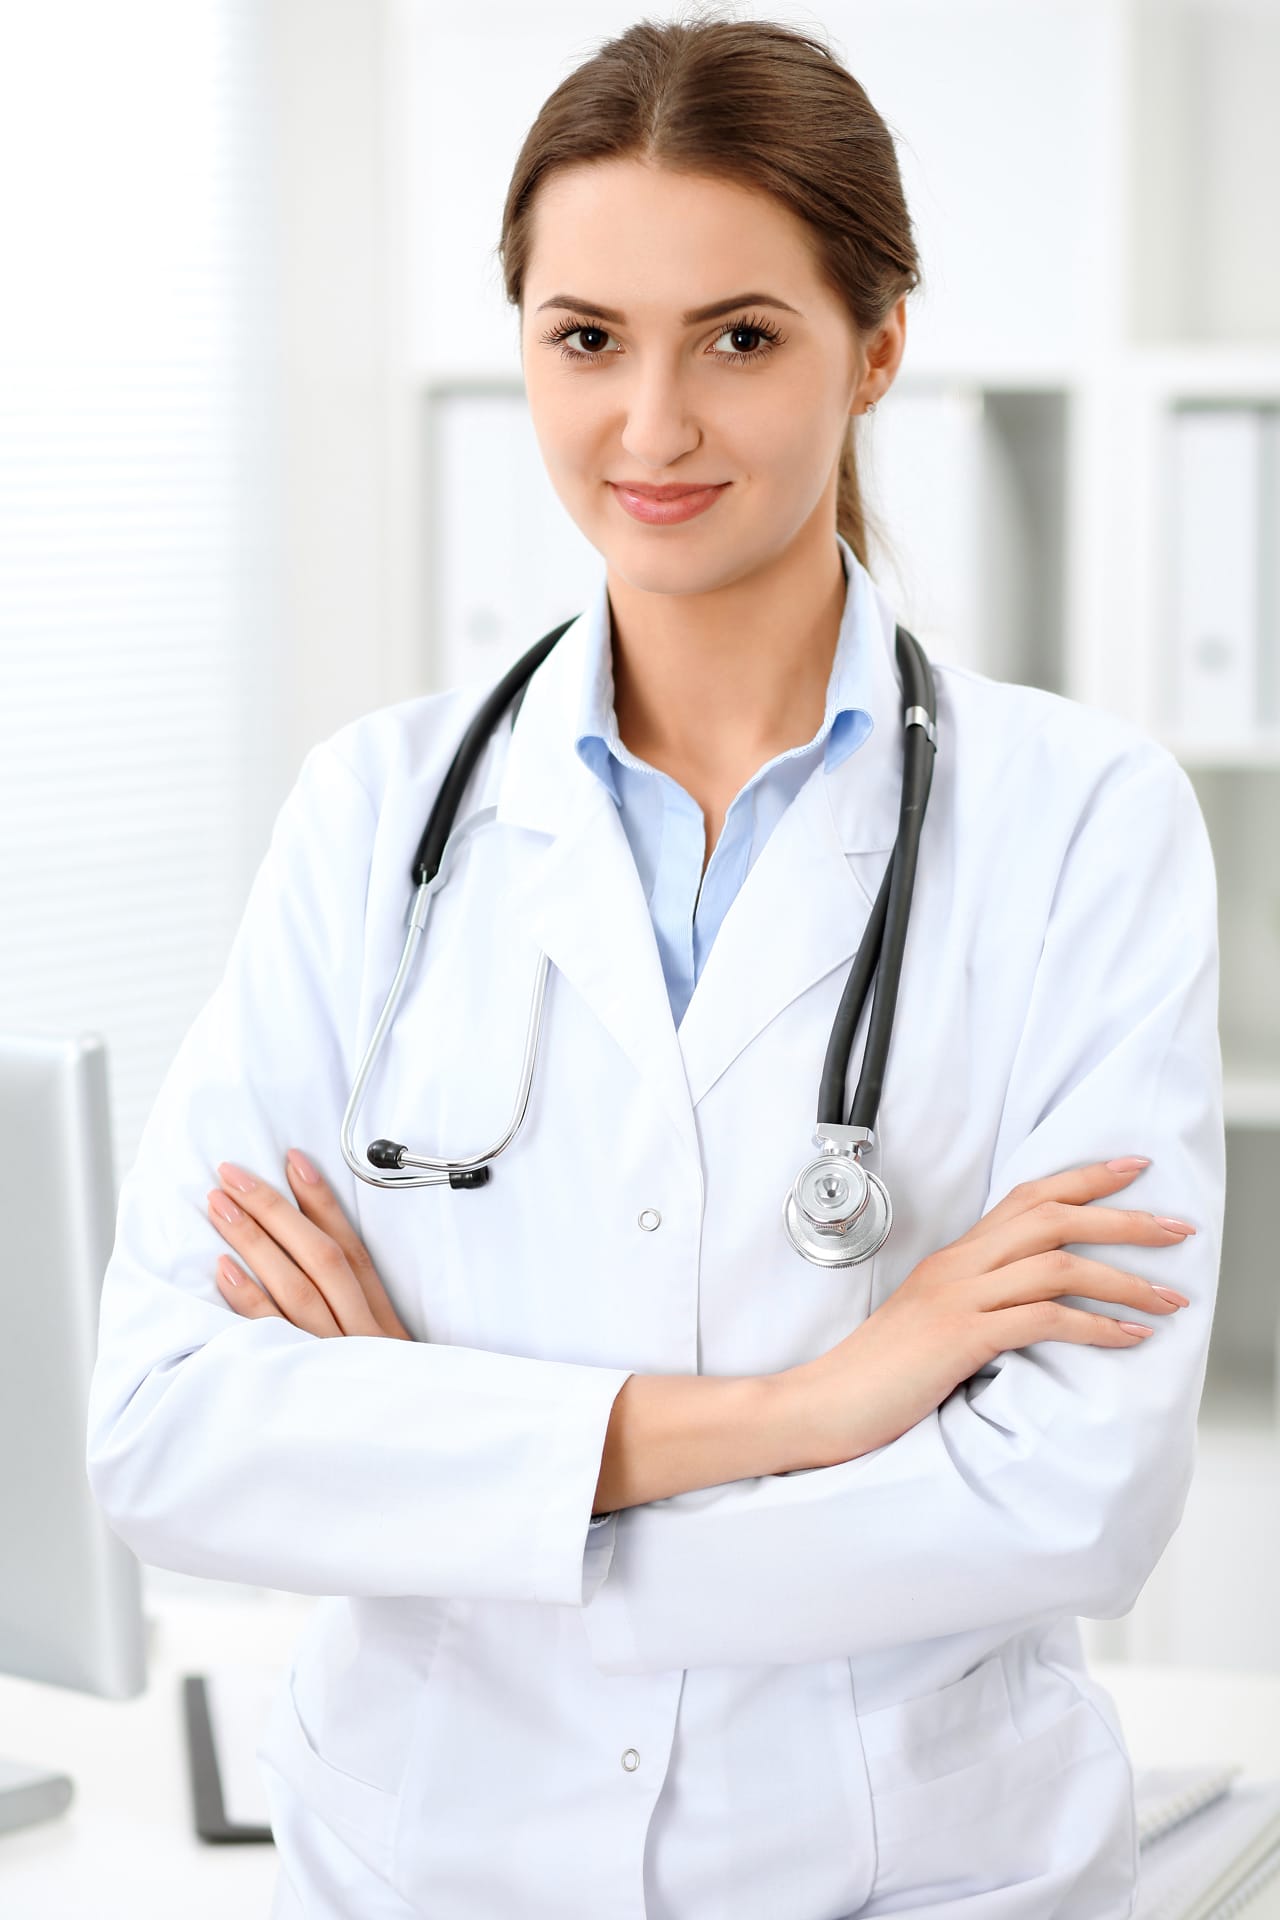 Related image doctor woman standing with arms crossed smiling hospital physician ready examine patient